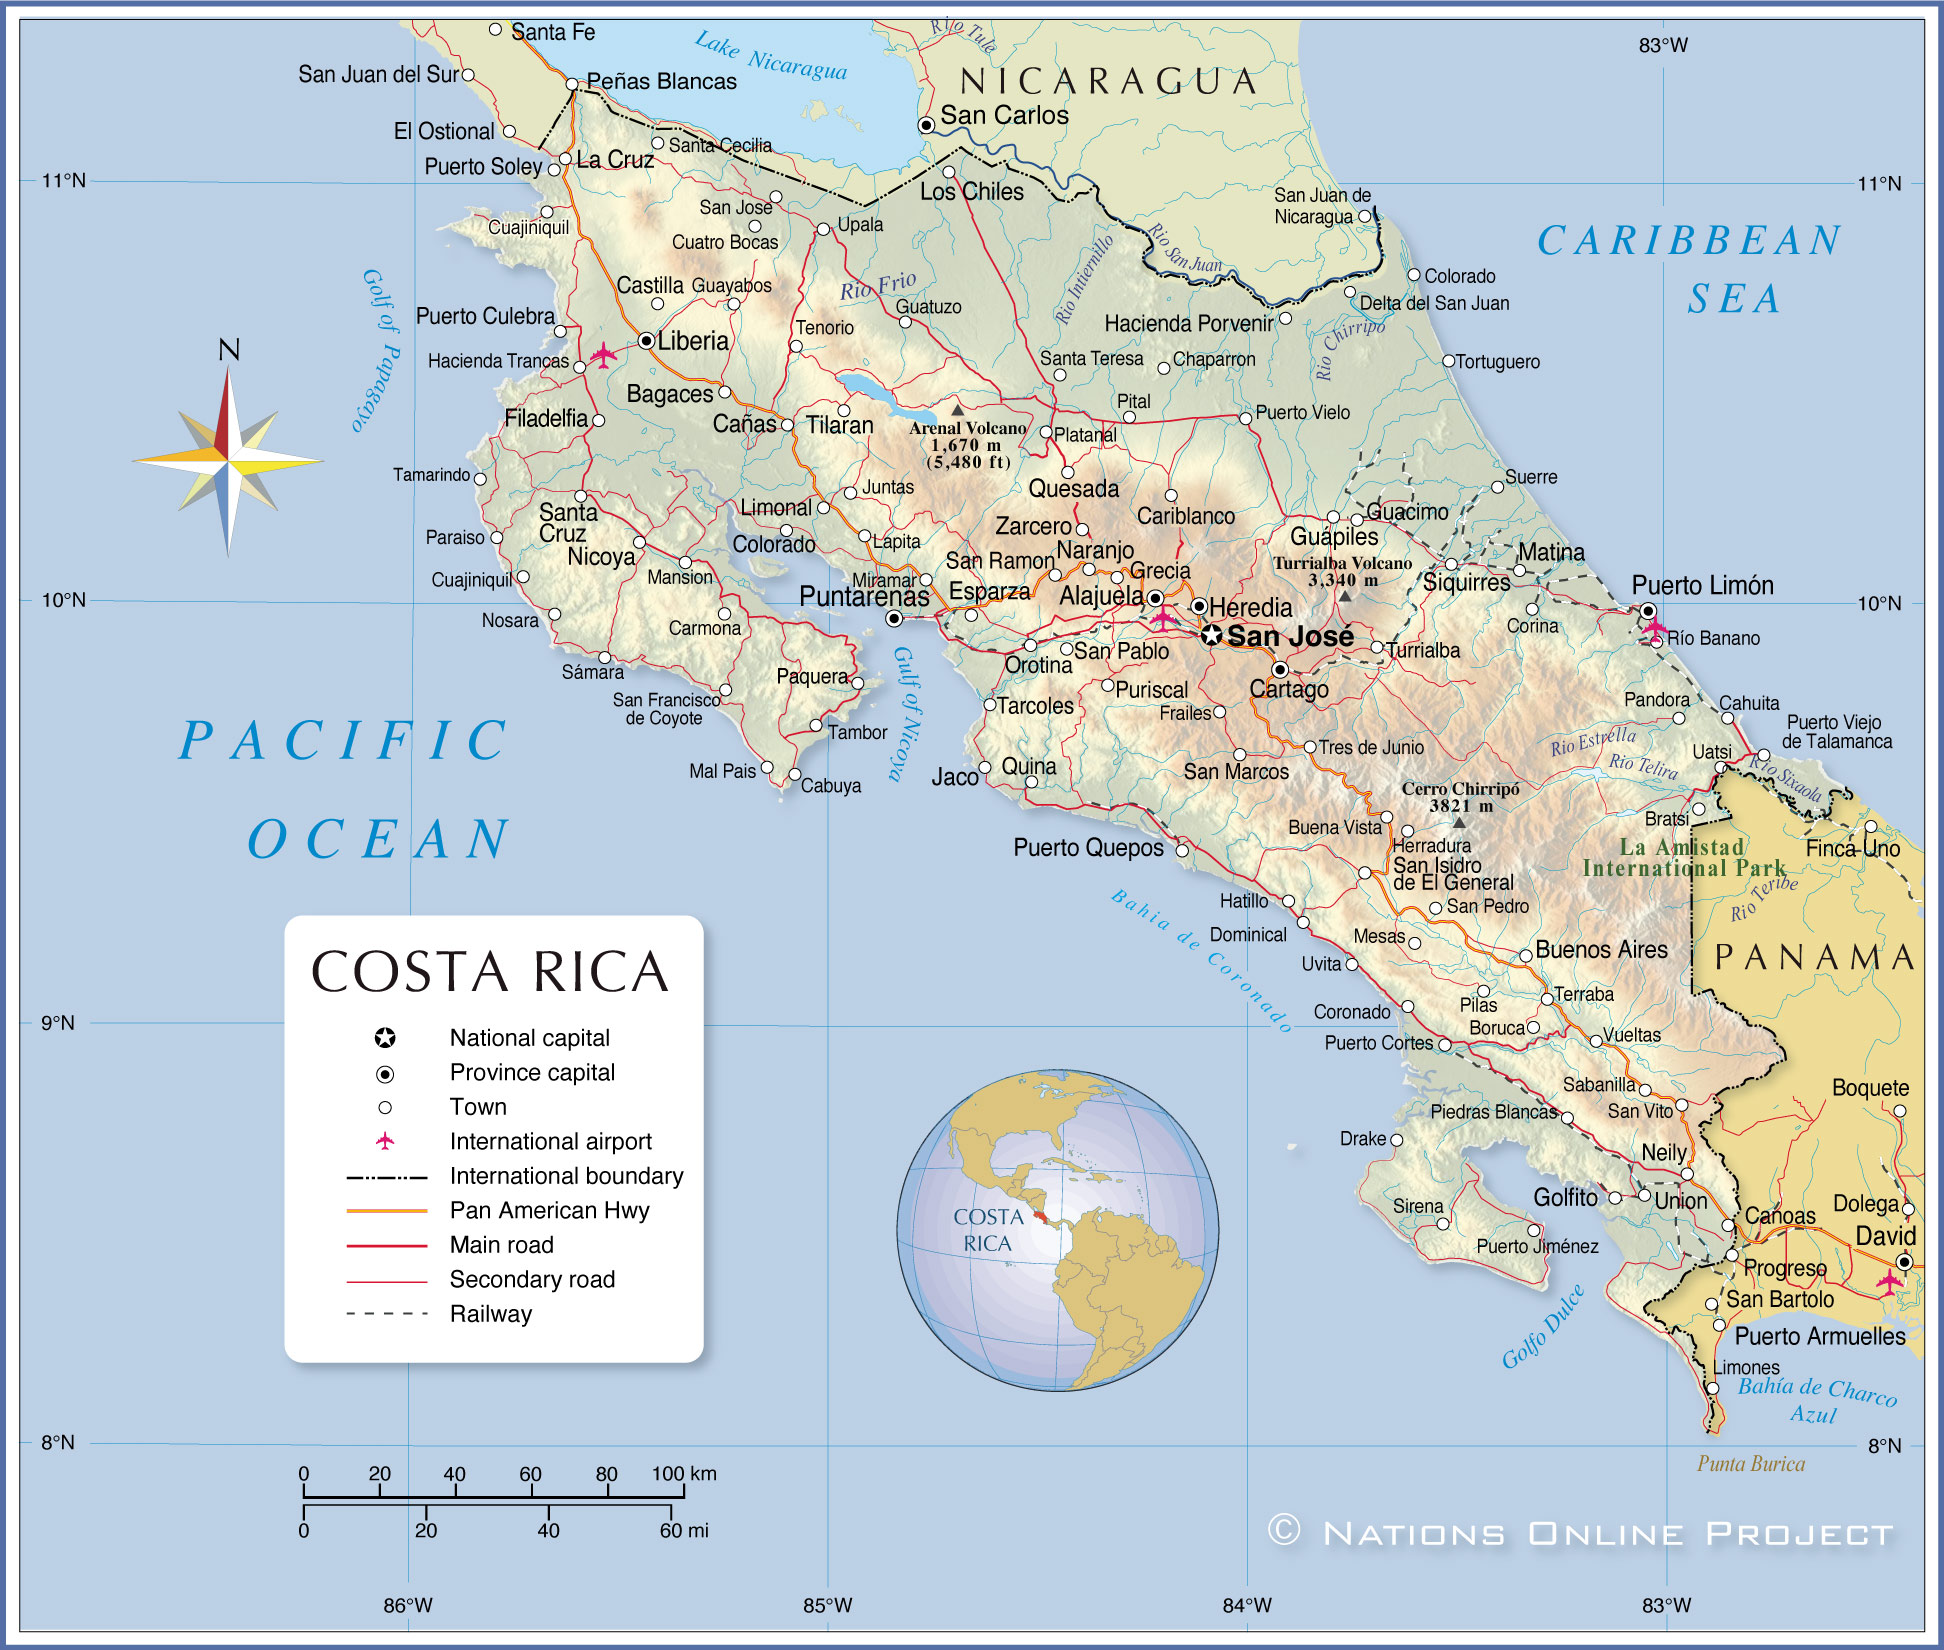 map of costa rica and panama Detailed Map Of Costa Rica Nations Online Project map of costa rica and panama